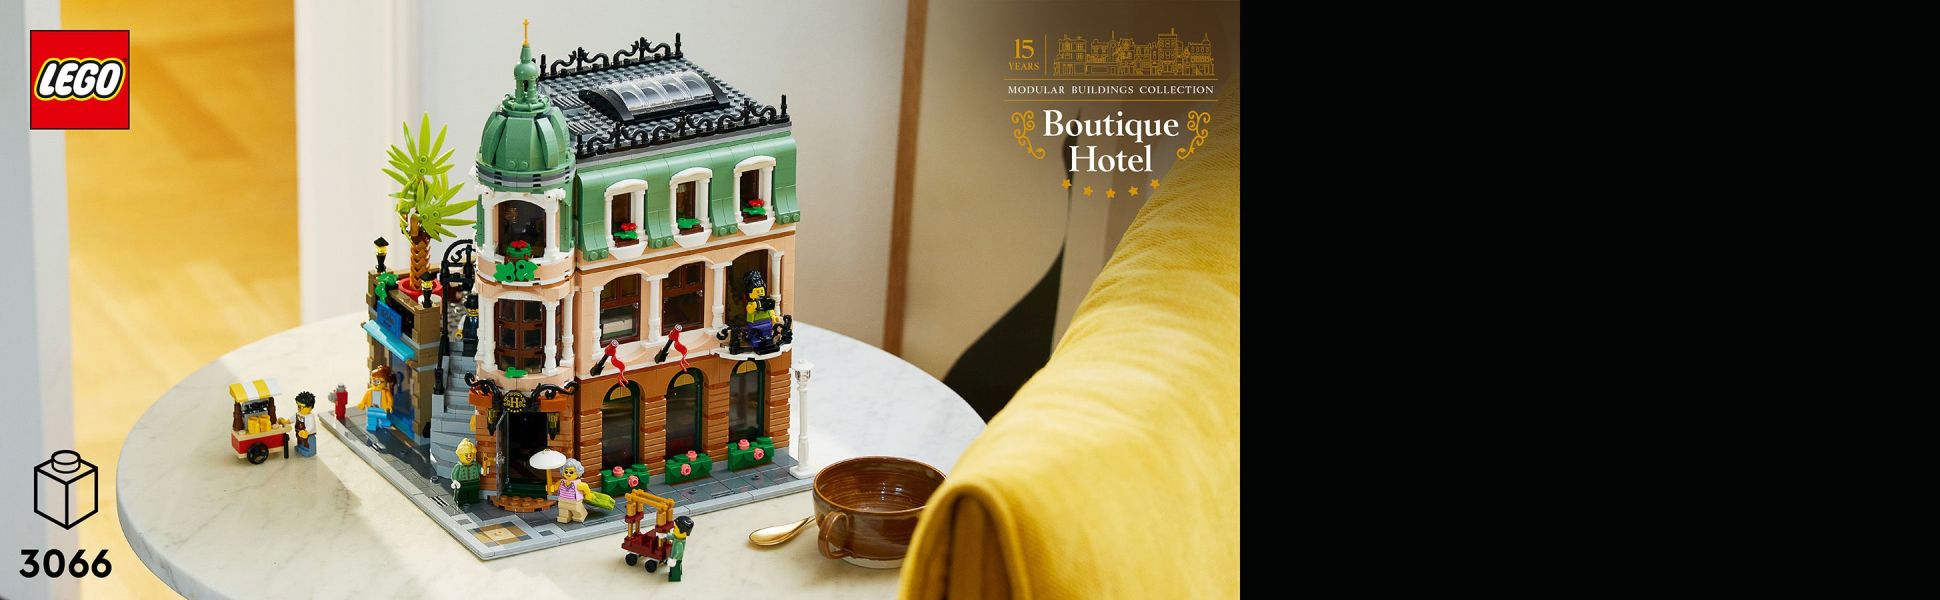 LEGO Icons Boutique Hotel 10297 Modular Building Display Model Kit